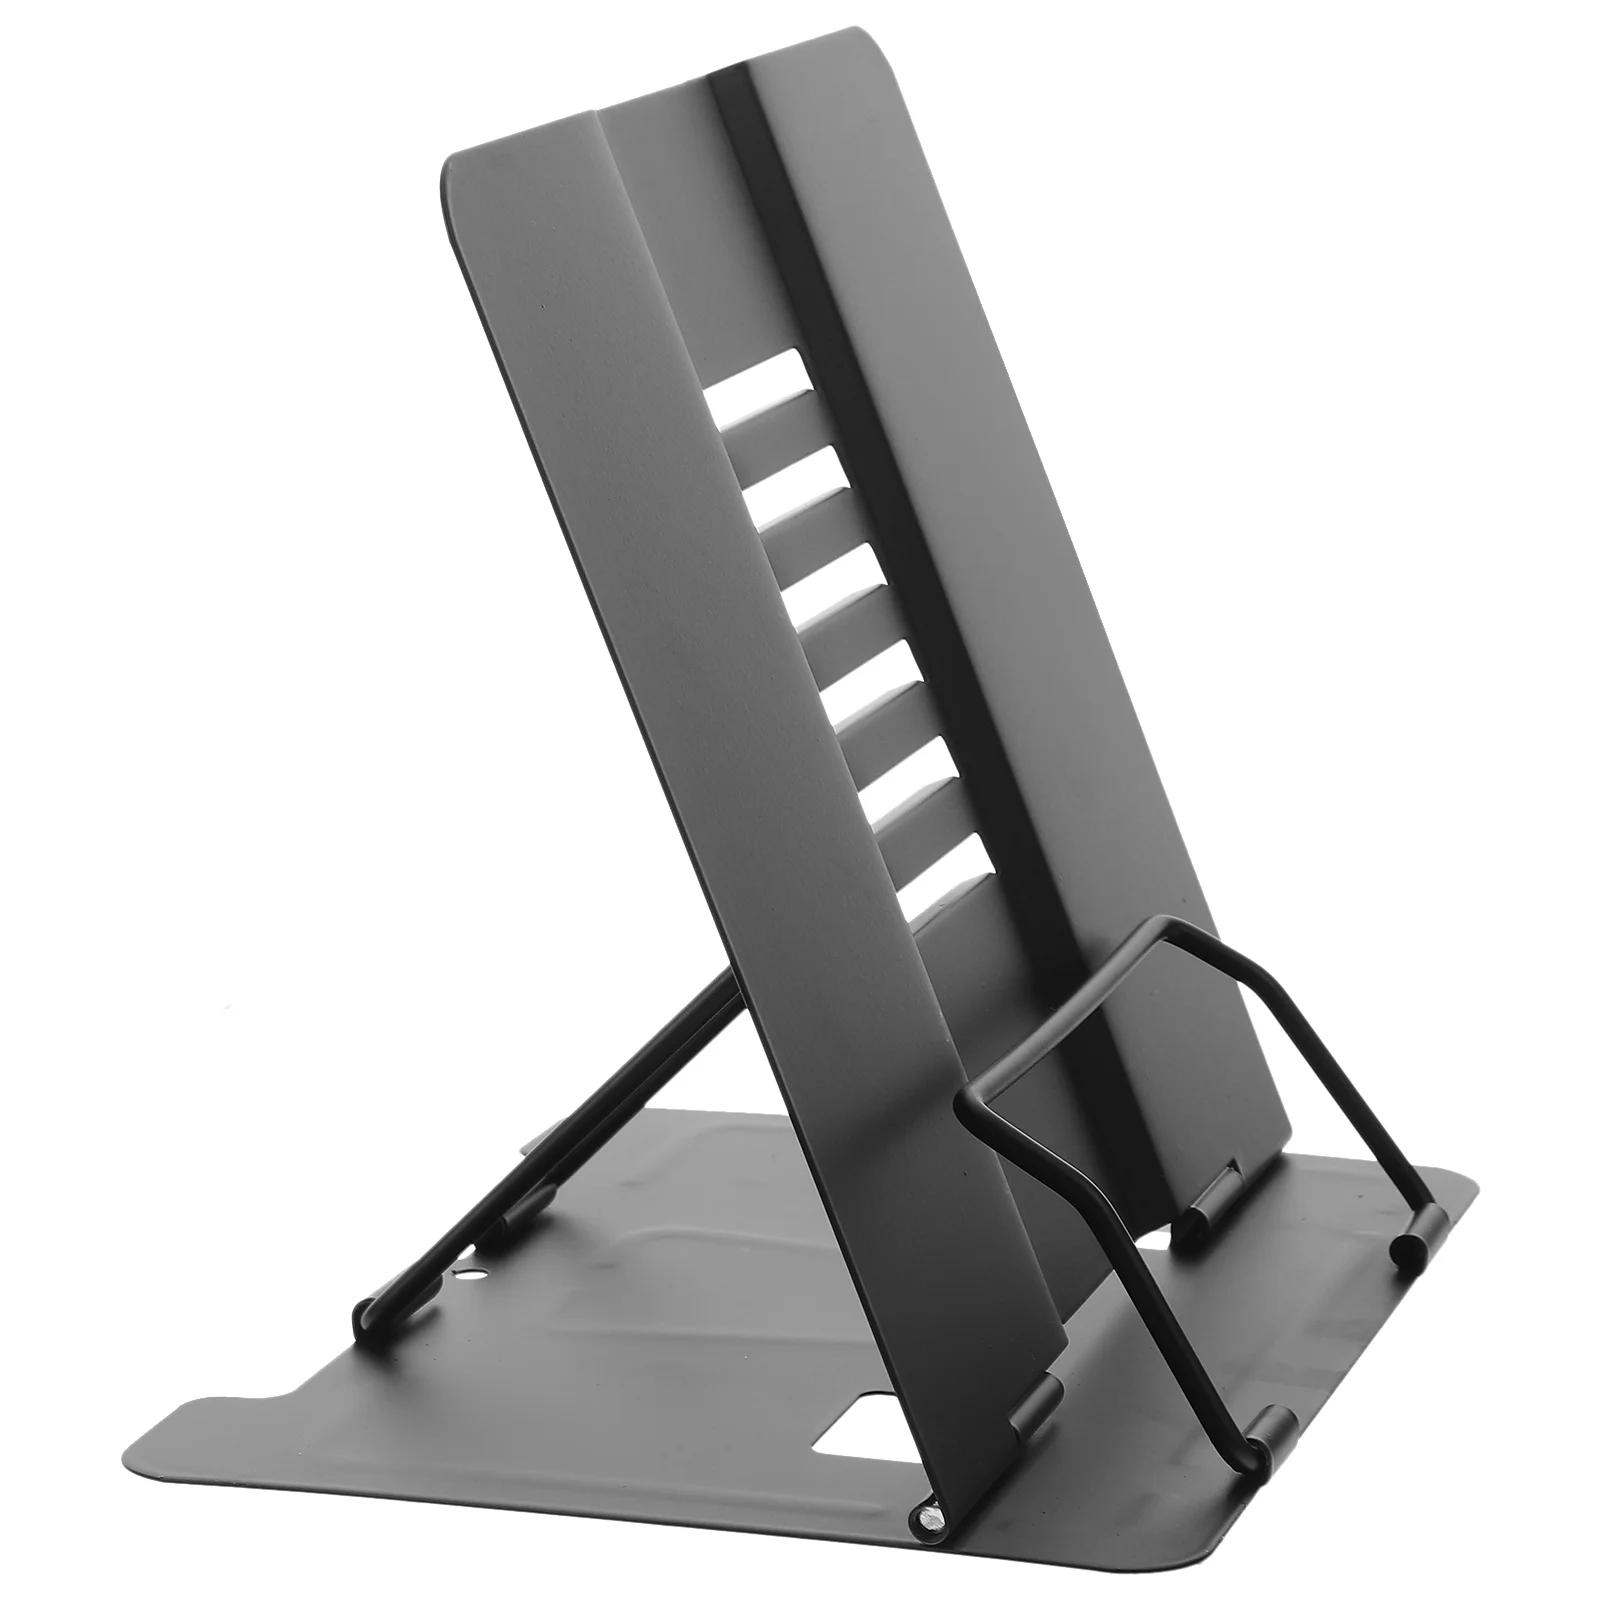 

Bookshelf Holder Folding Stand Portable Desktop Toddlers Iron Support Rack Reading Learning Office Collapsible Laptop